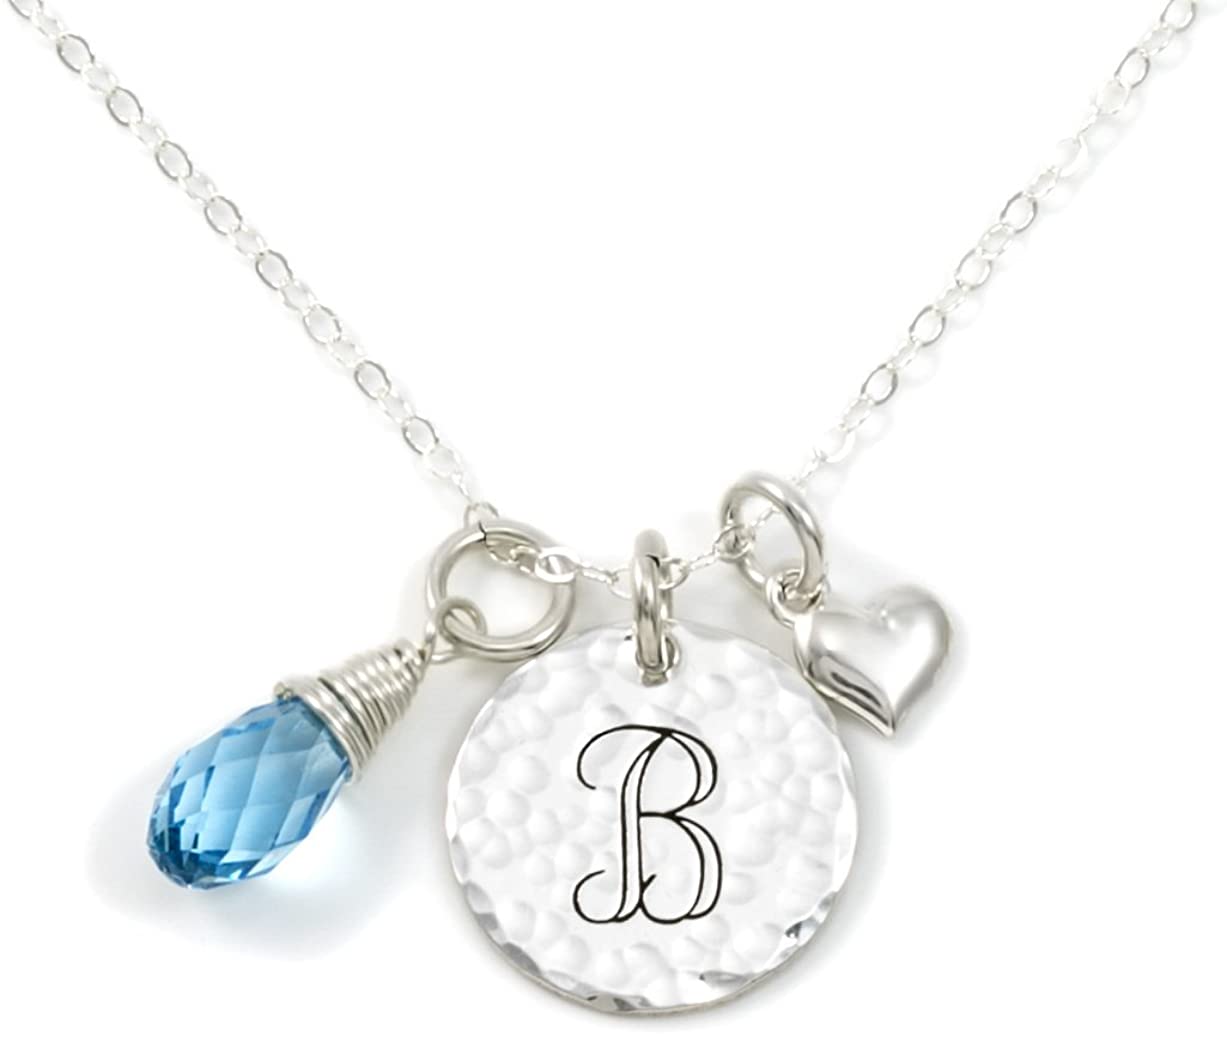 Keep It Simple Personalized Initial Necklace with Swarovski Briolette